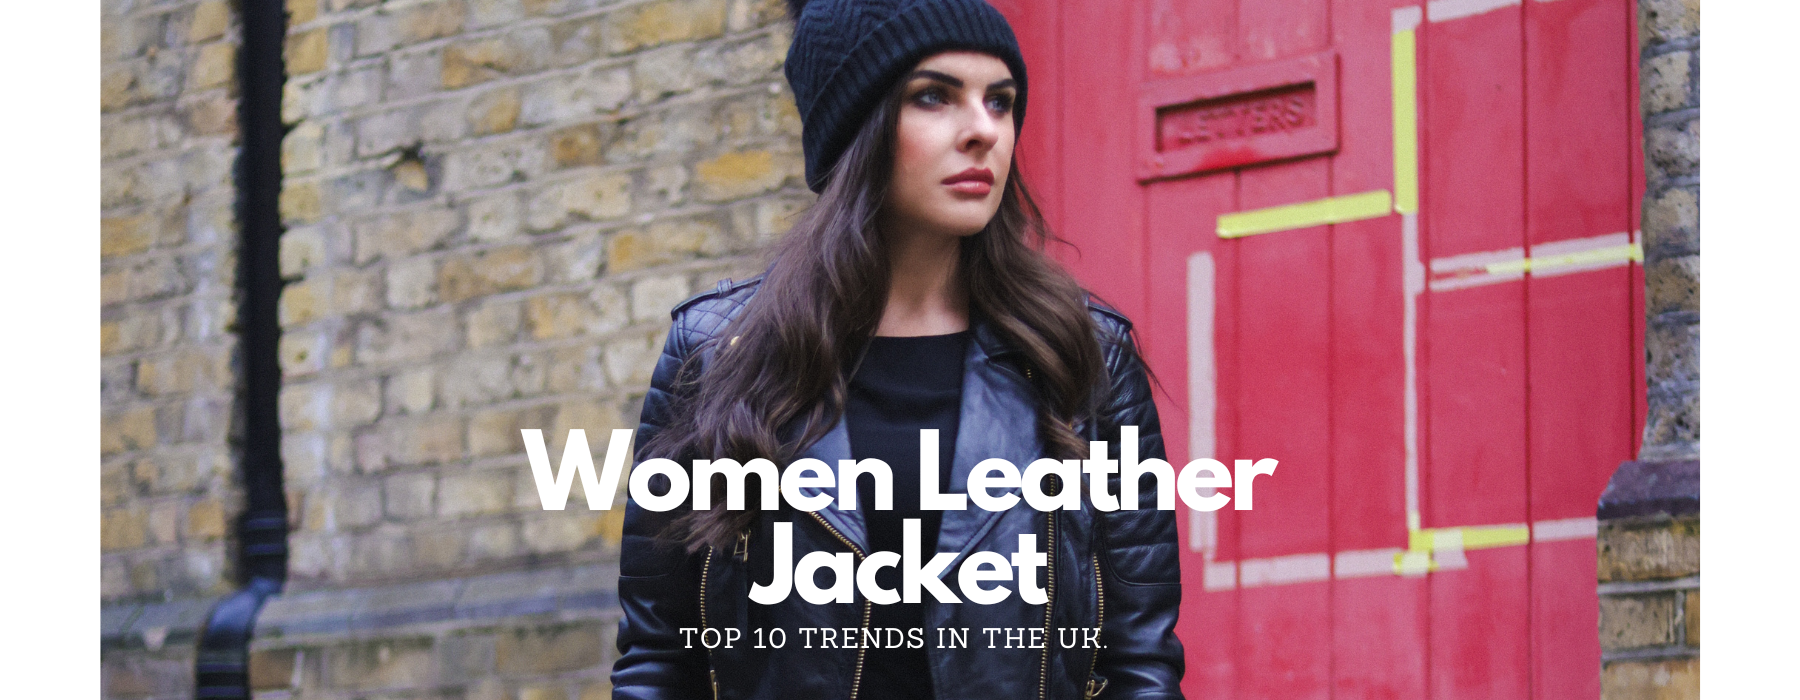 Top 10 Women's Leather Jacket Trends in the UK